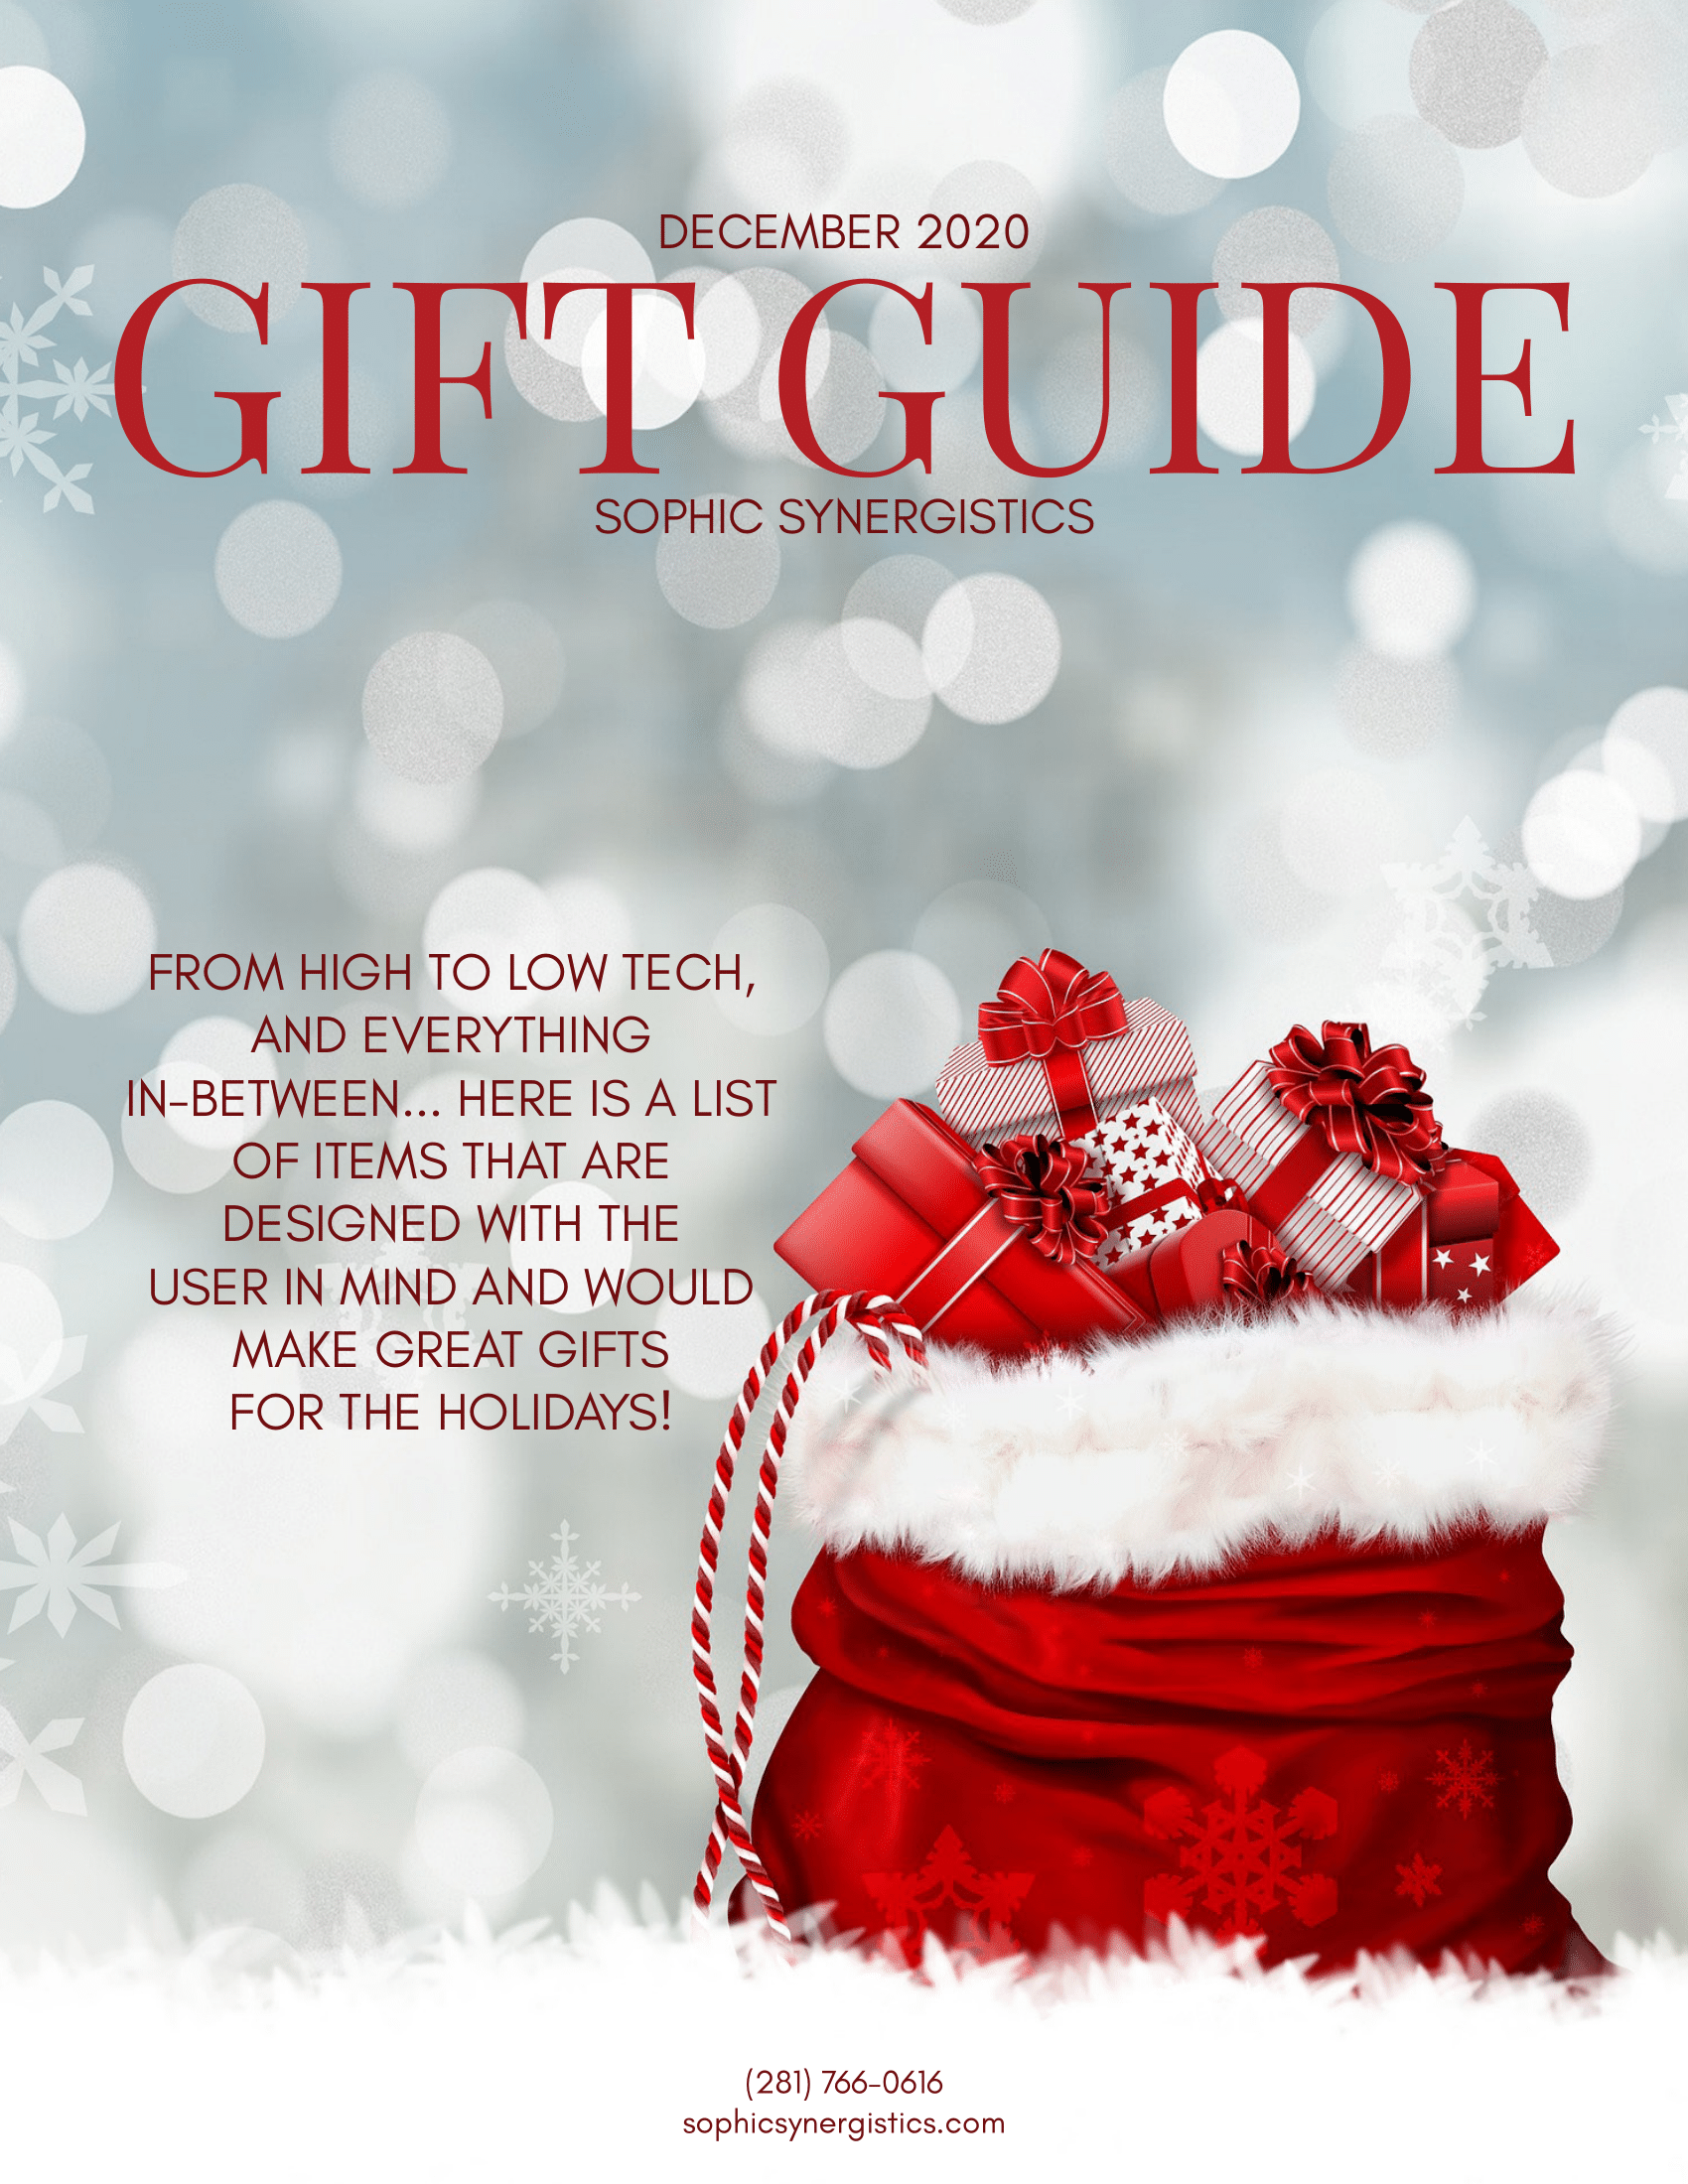 December 2020 Gift Guide by Sophic Synergistics From high to low tech, and everything in-between... Here is a list of items that are design with the user in mind and would make great gifts for the holidays.